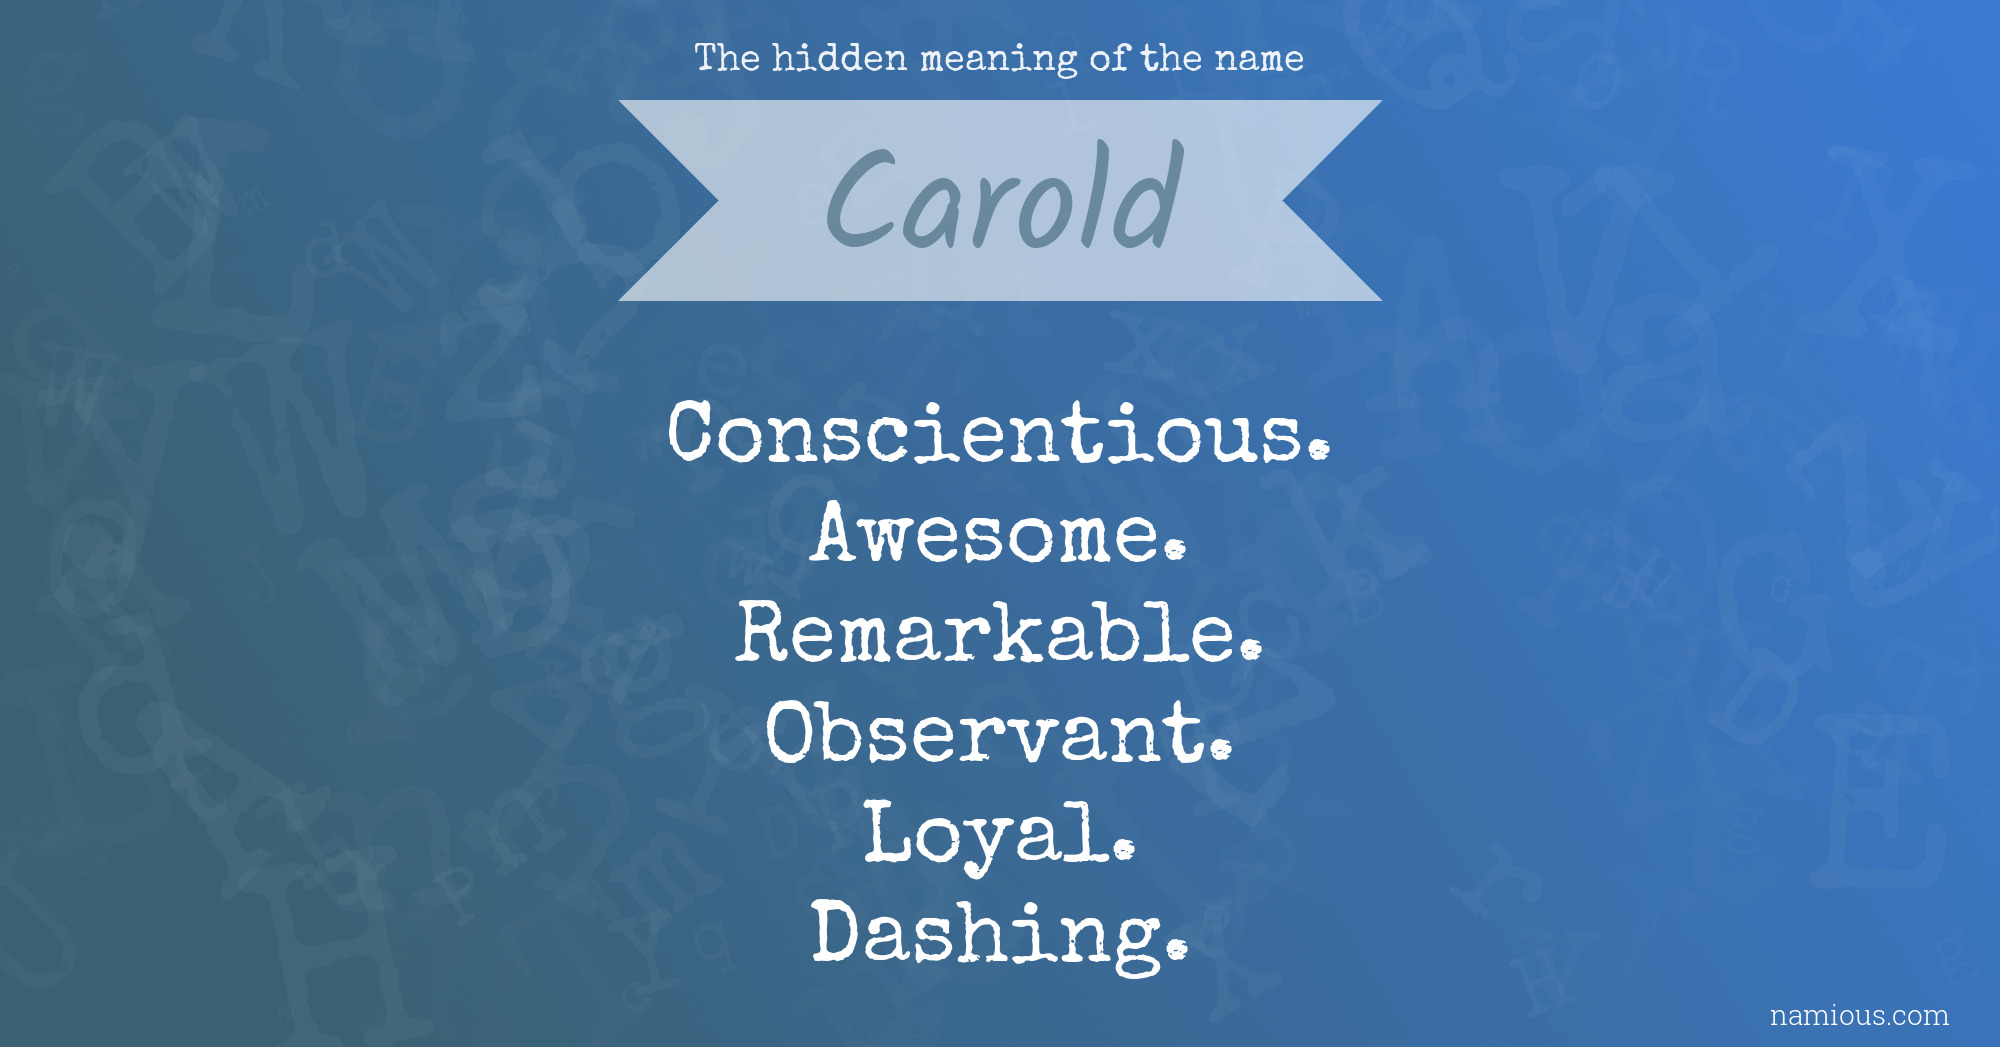 The hidden meaning of the name Carold